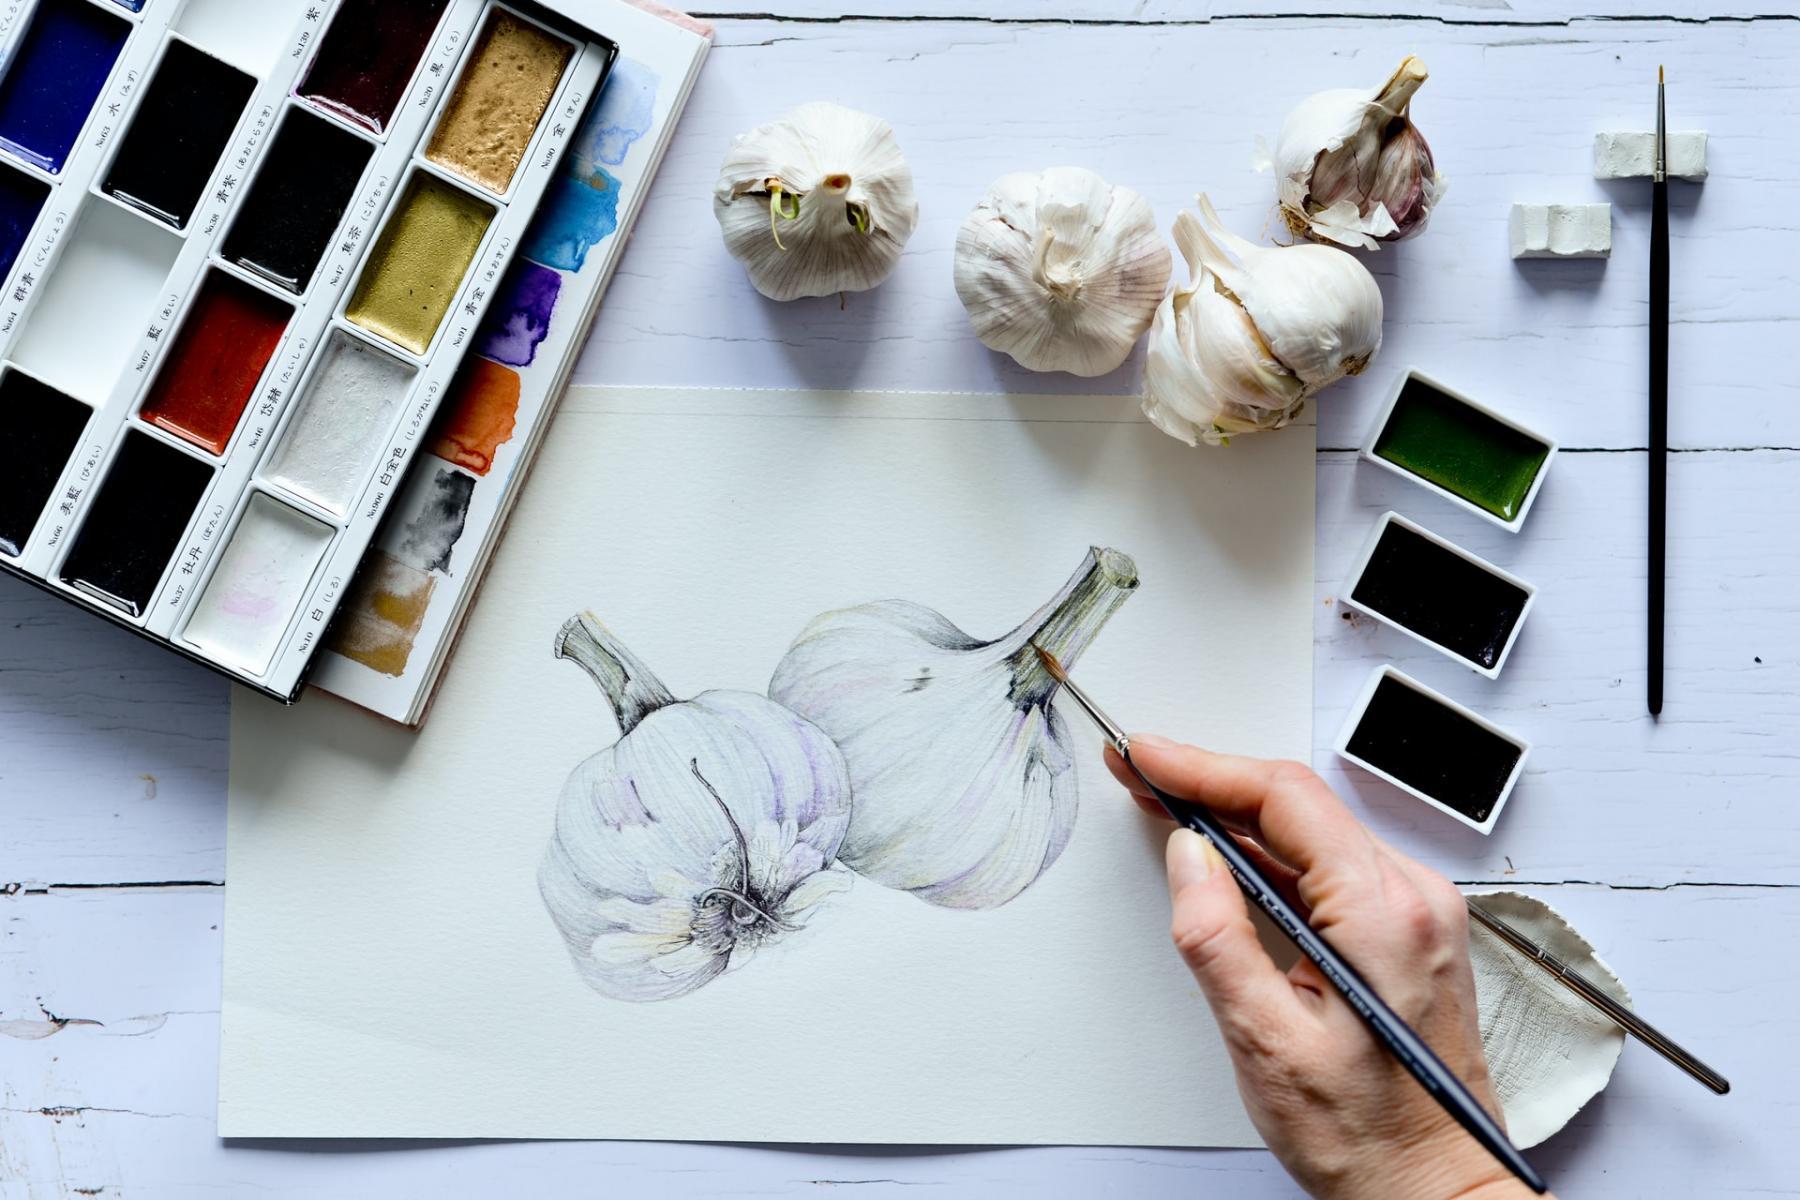 Techniques For Using A Blow Dryer To Dry Paintings Quickly - Beebly's  Watercolor Painting